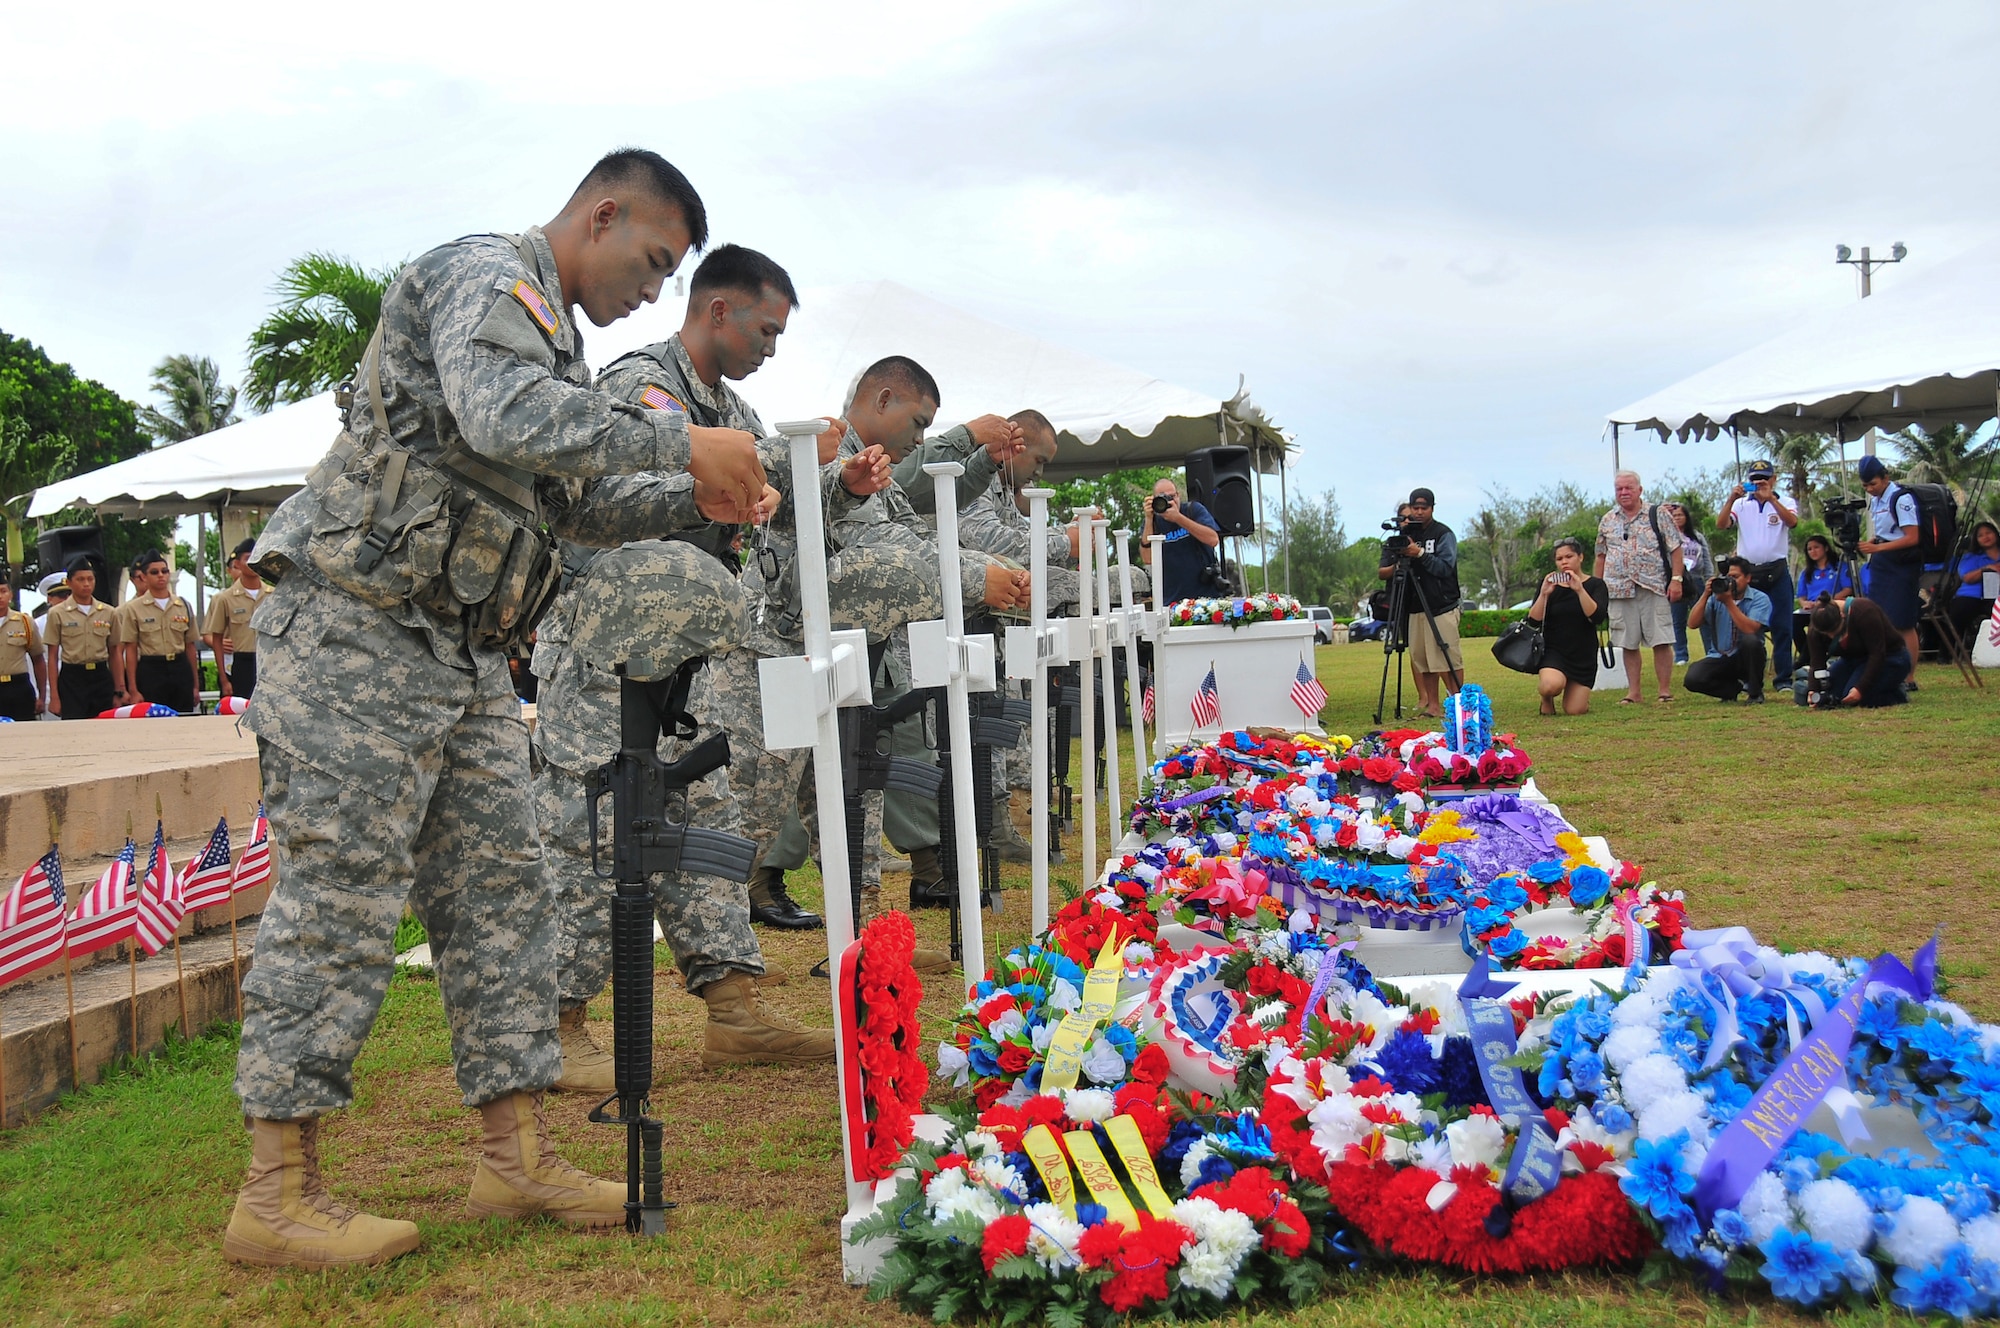 Soldiers from the Guam National Guard hang dog tags over their helmets during a grave-side tribute during the Memorial Day Ceremony at the Guam Governor’s Complex in Hagåtña, May 26, 2014. During the tribute, the Andersen Air Force Base Blue Knights honor guard paid respects to fallen service members by performing a 21-gun salute. (U.S. Air Force Photo by Staff Sgt. Brok McCarthy/Released)